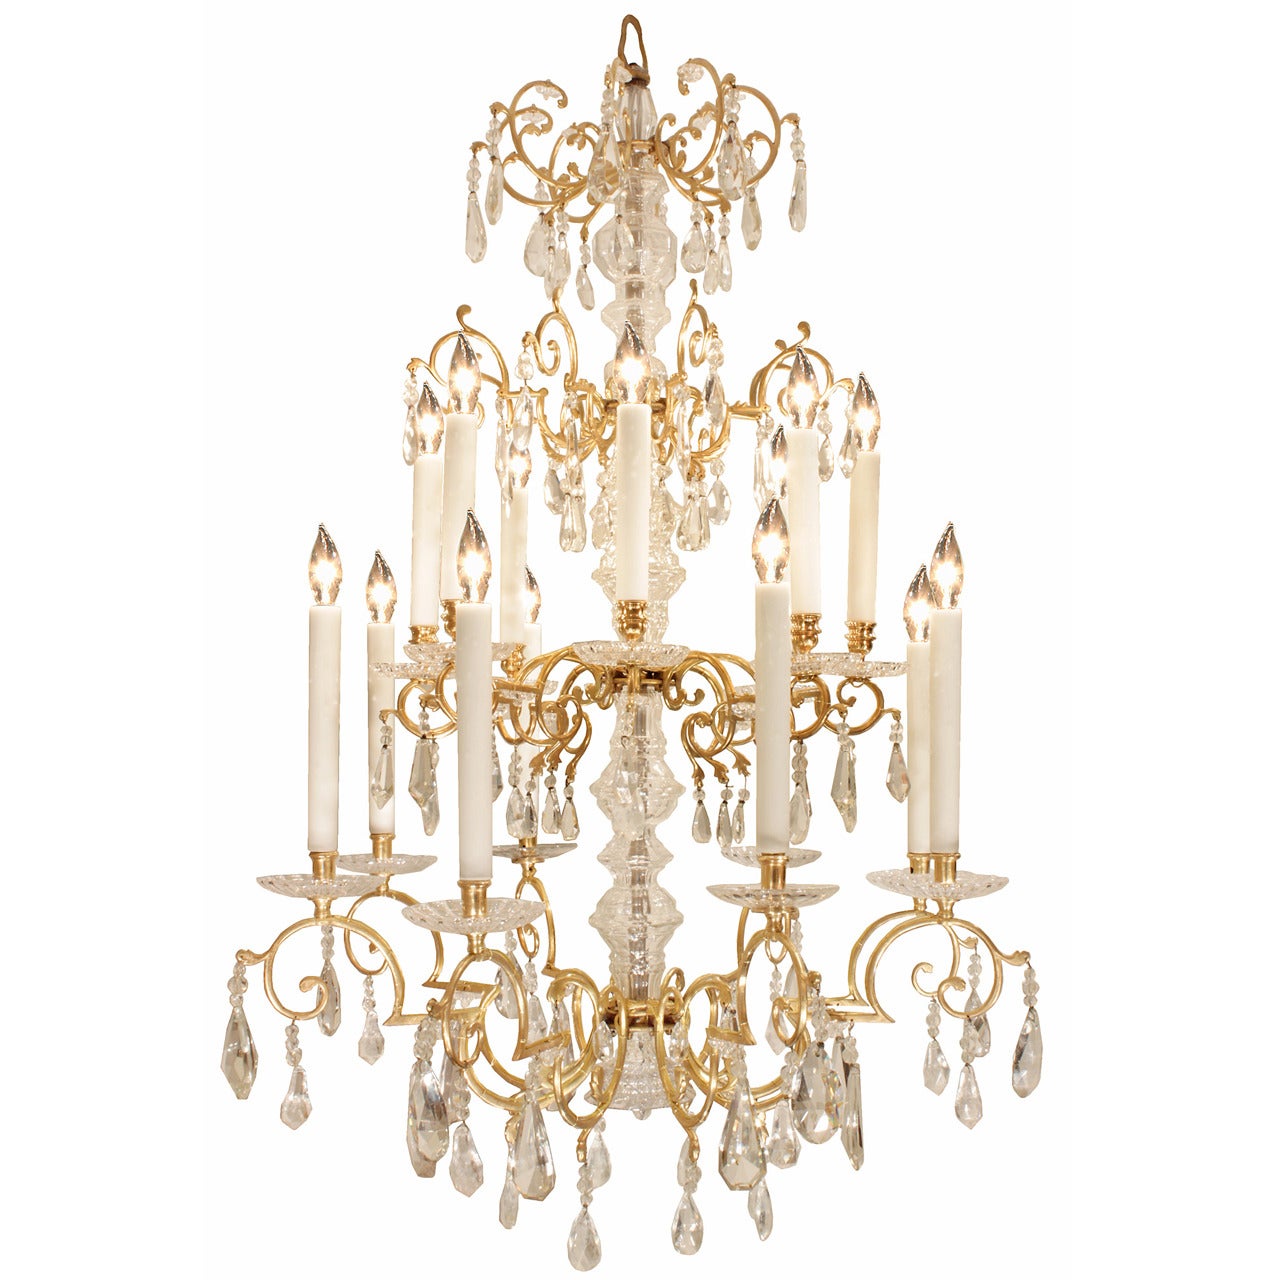 French 19th century Louis XVI Style Baccarat and Rock Crystal Chandelier